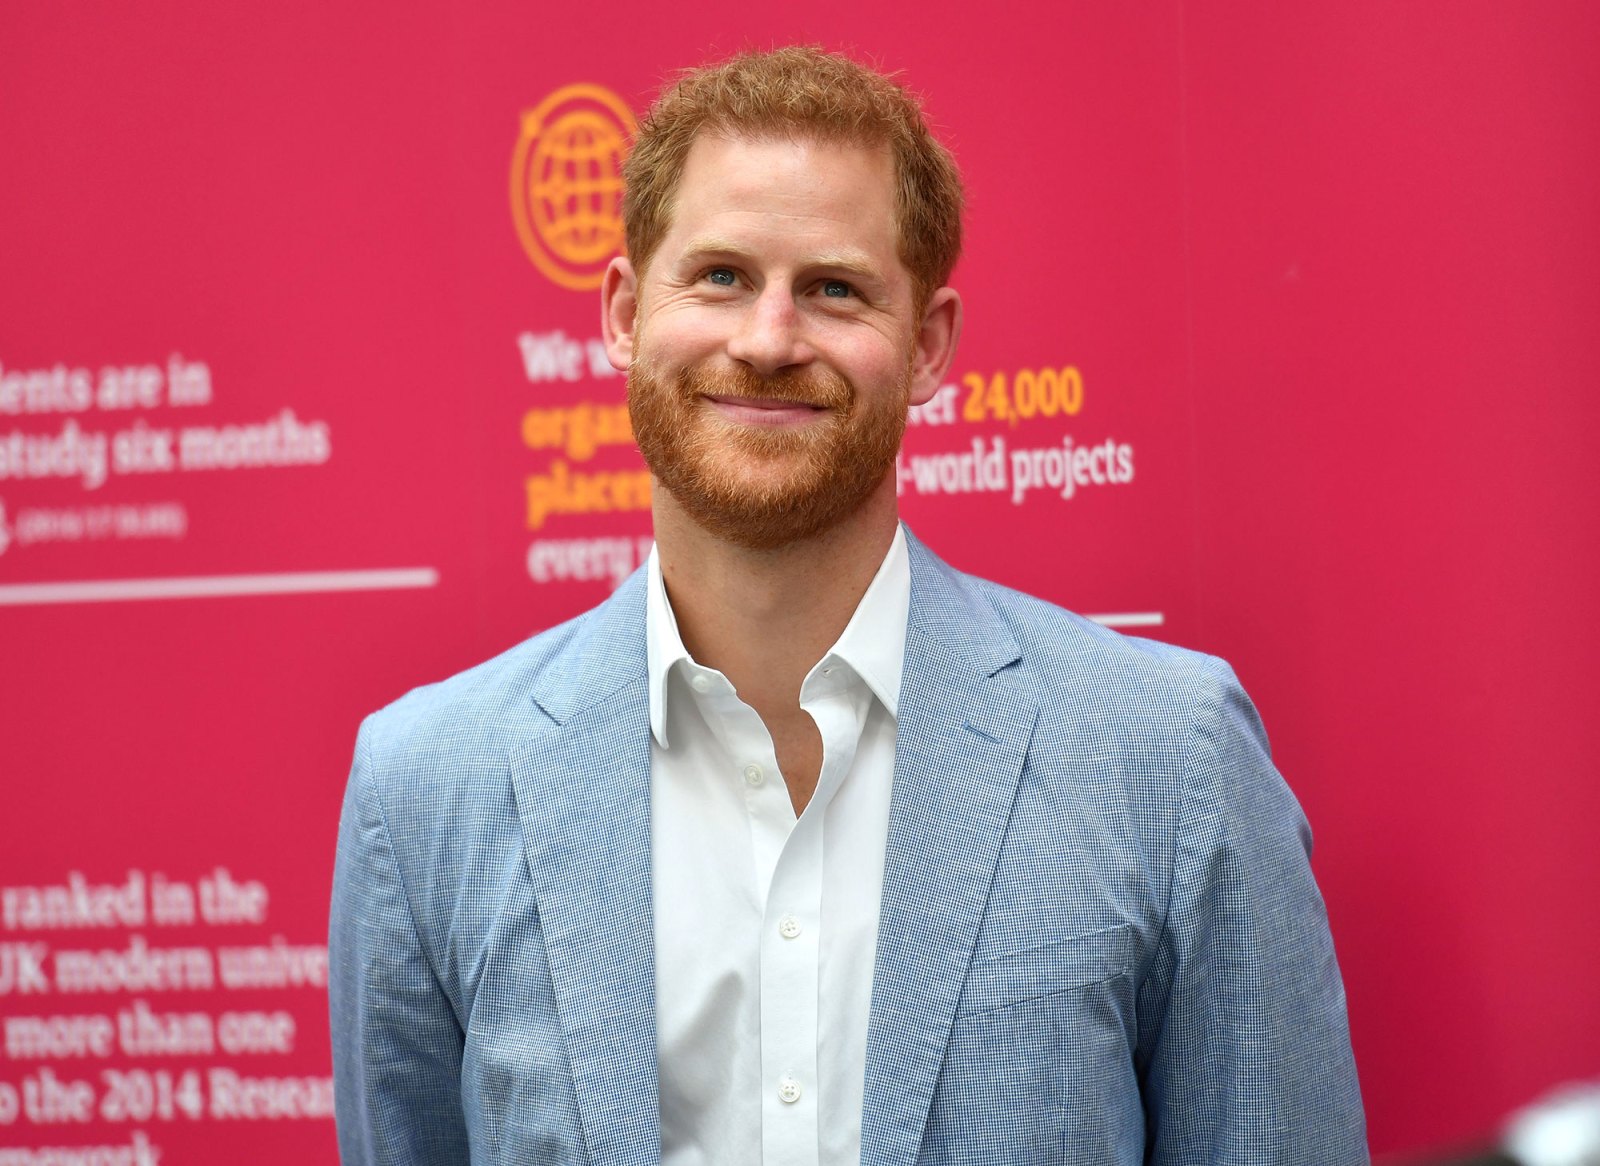 Prince Harry Makes Time for Self-Care Raising Son Archie and Daughter Lilibet